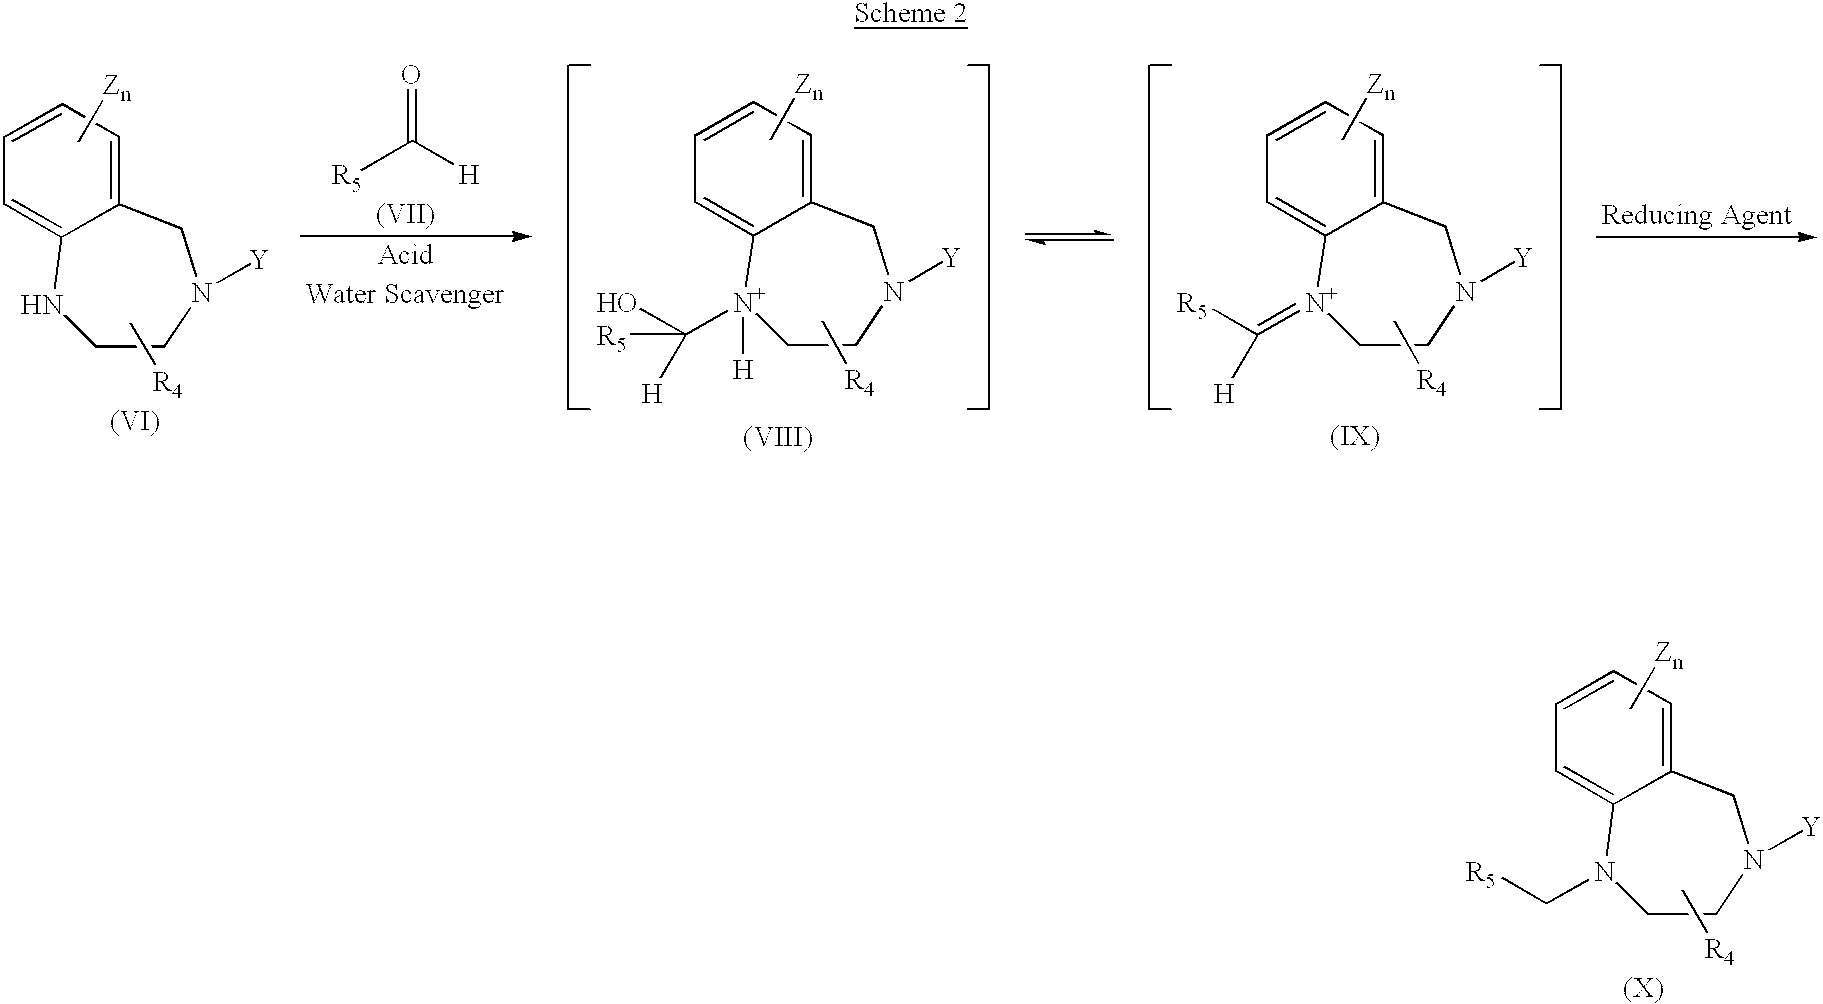 Production of tertiary amines by reductive amination